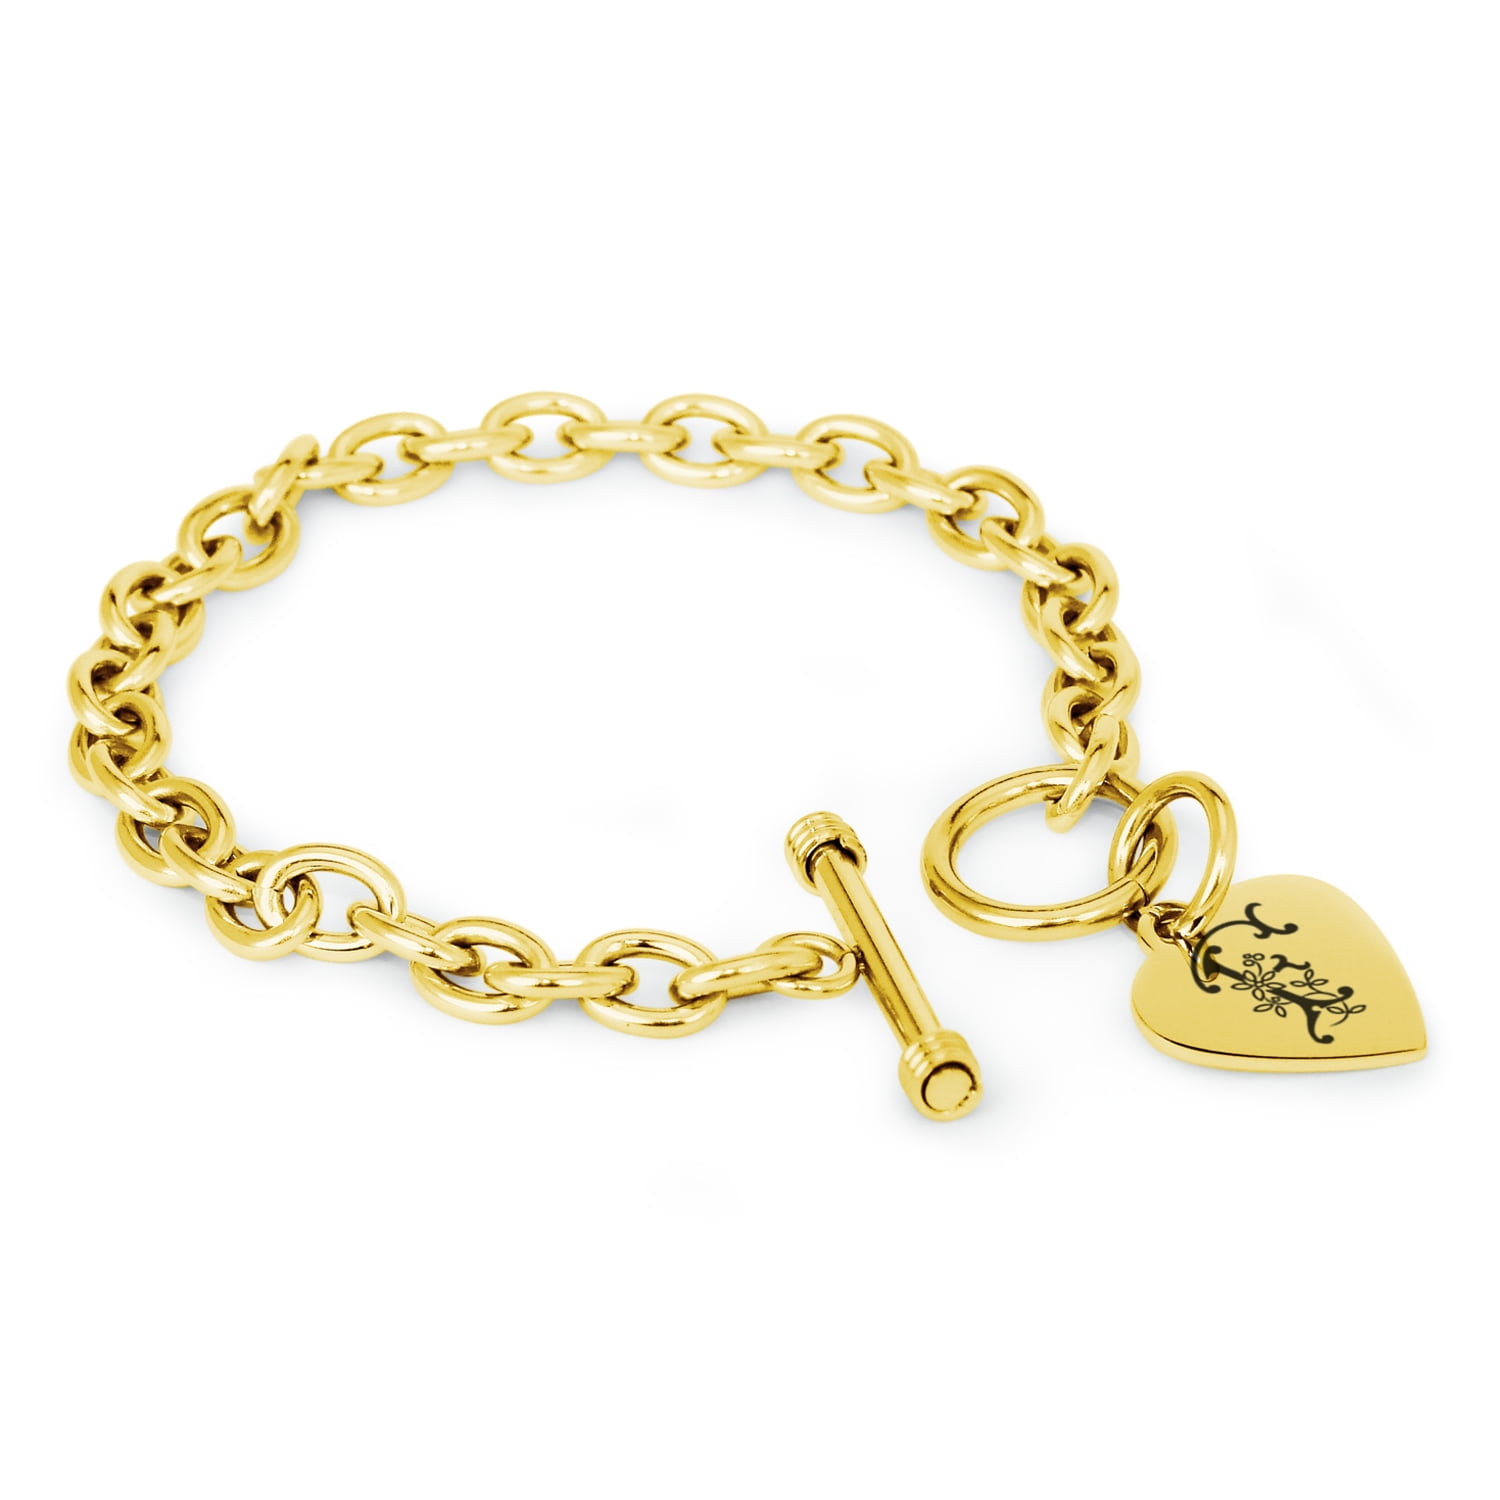 Monogram Charm Bracelet With Toggle Clasp and Heart Charm 